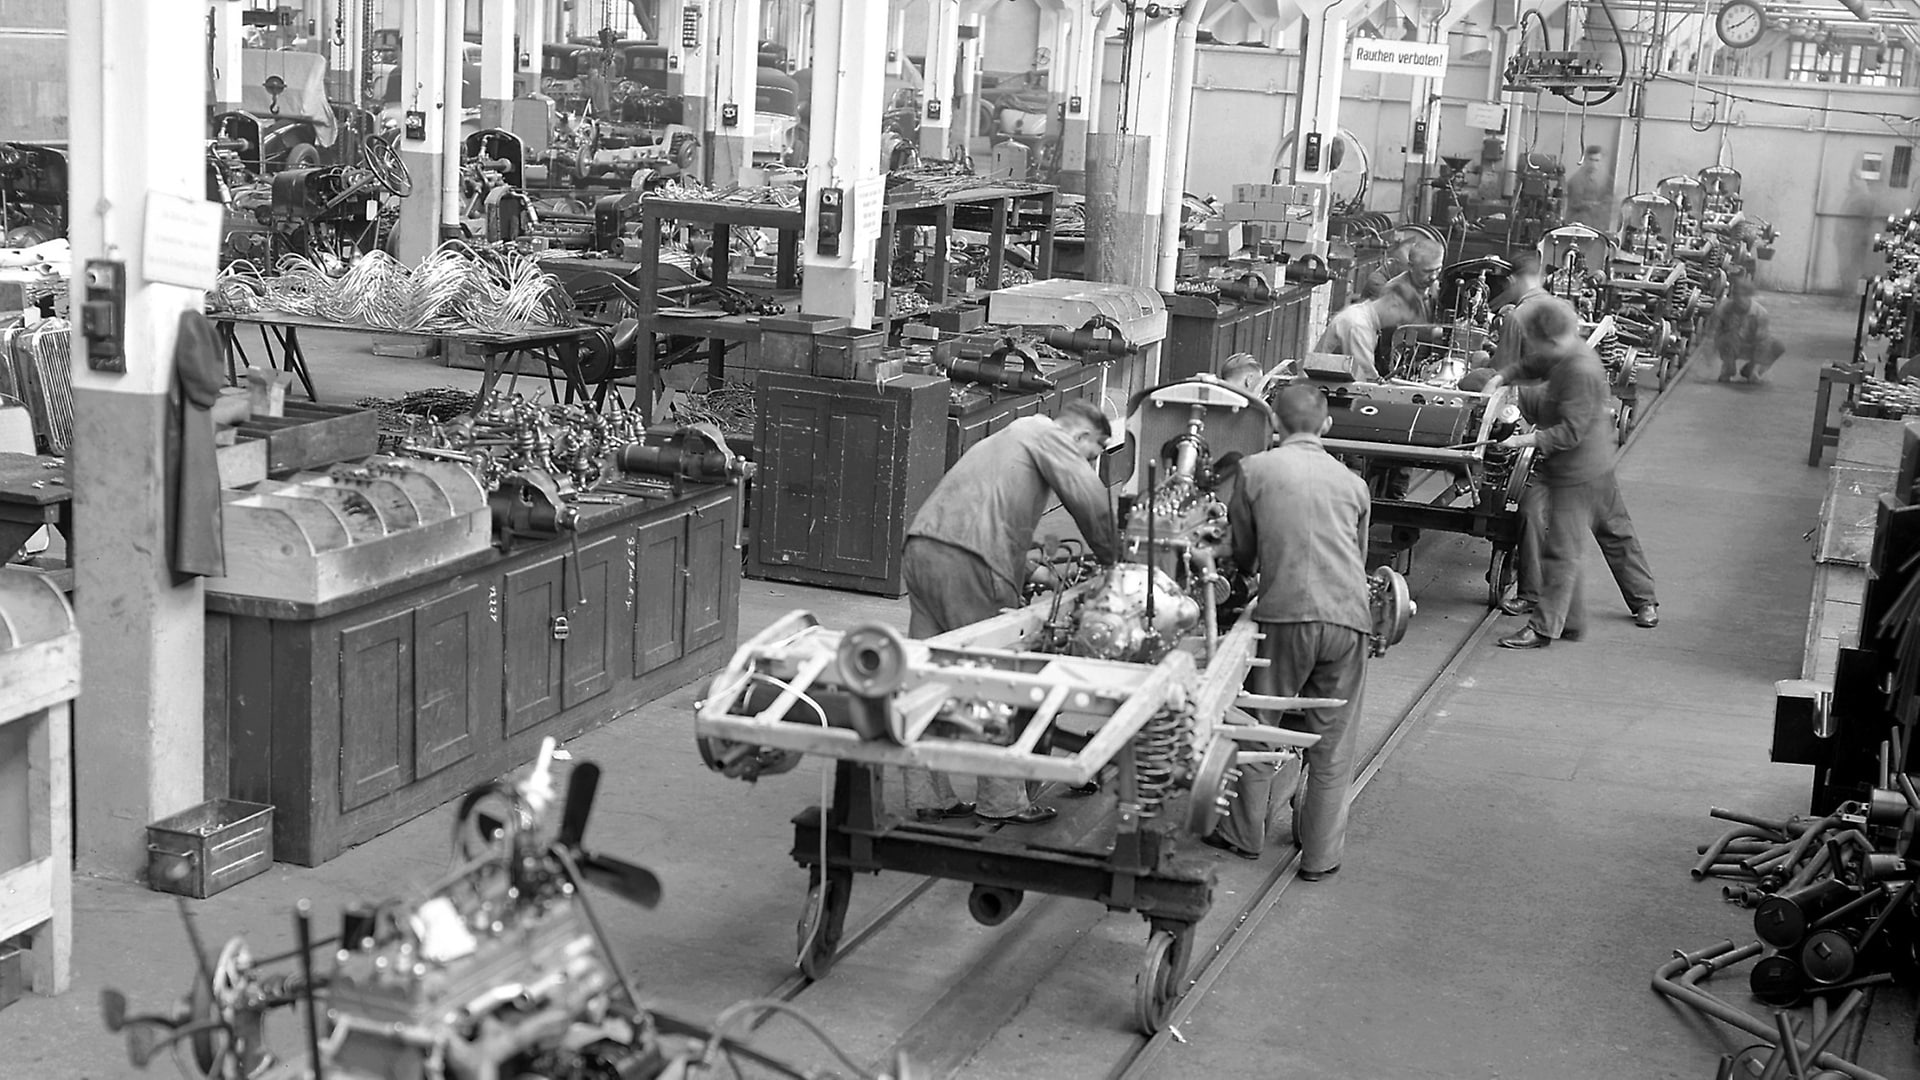 Assembly line production of chassis in Untertürkheim around 1925.